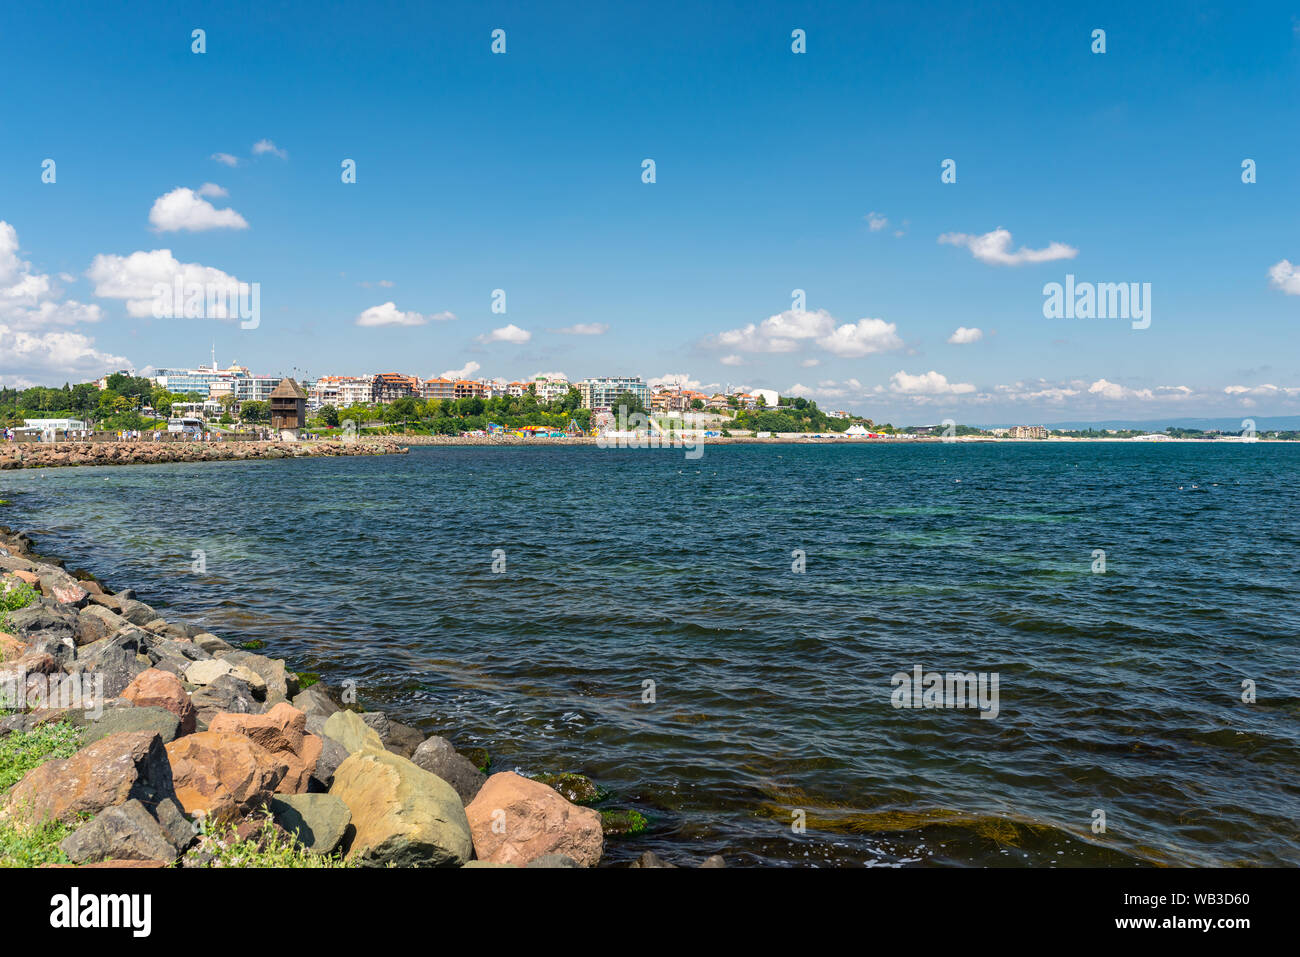 Sunny Beach, Bulgaria July 15, 2019. Hotels and houses on the shores of the Black Sea in Sunny Beach seen from afar. Stock Photo